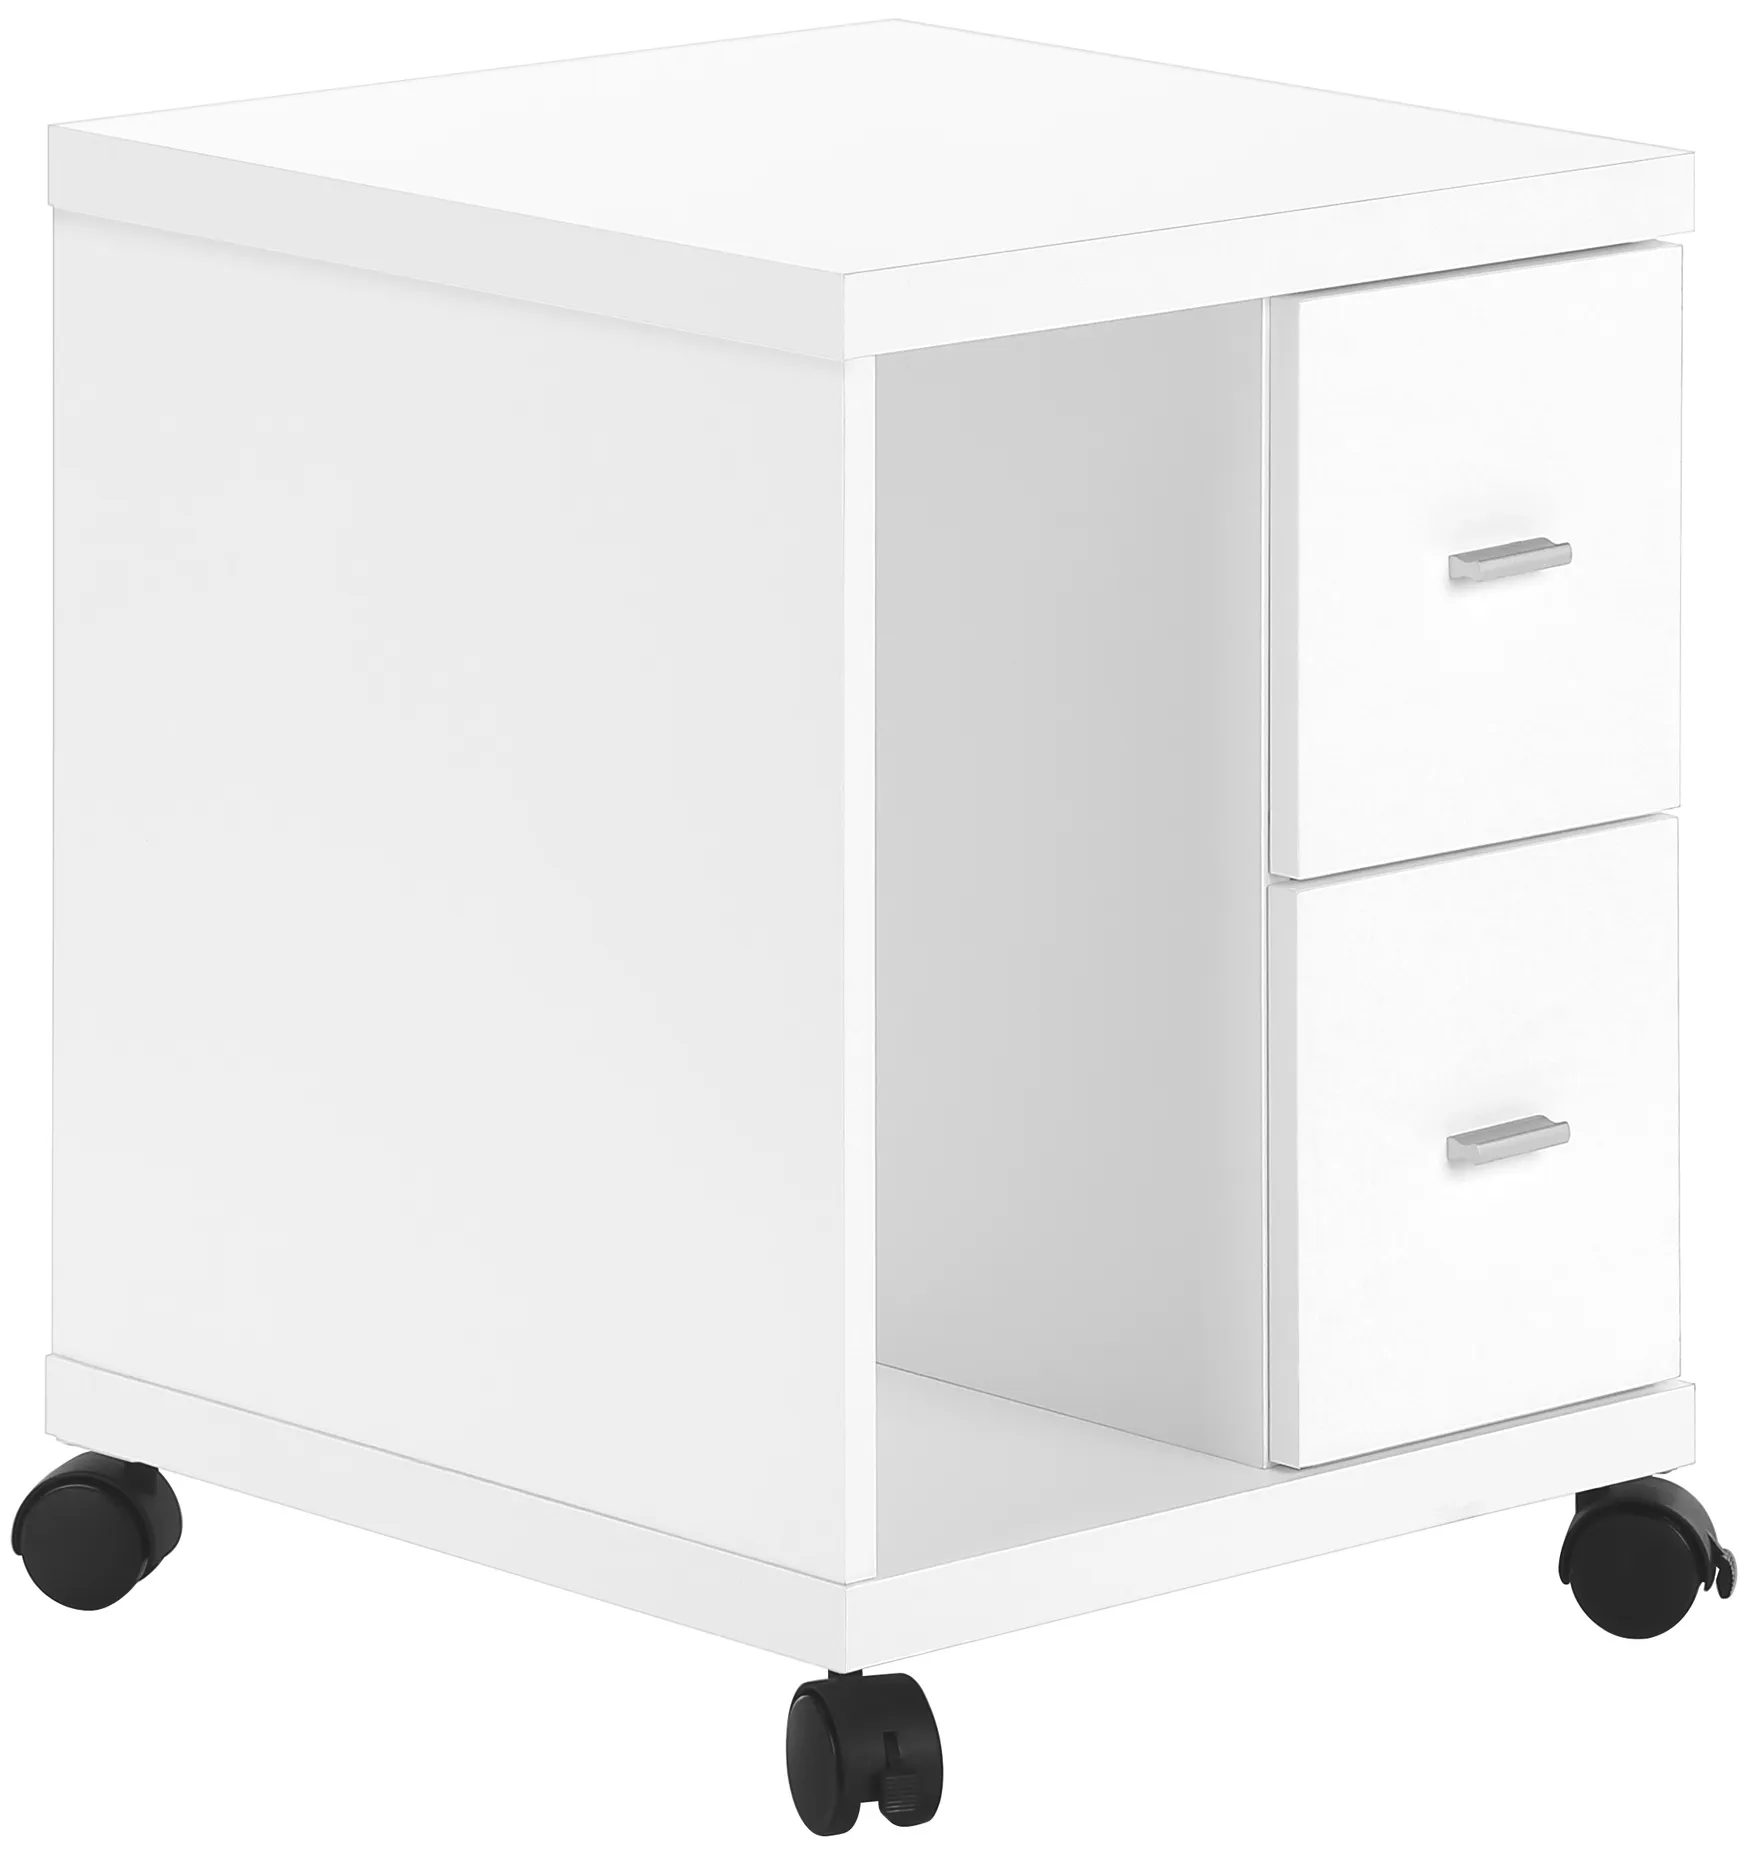 Office, File Cabinet, Printer Cart, Rolling File Cabinet, Mobile, Storage, Work, Laminate, White, Contemporary, Modern